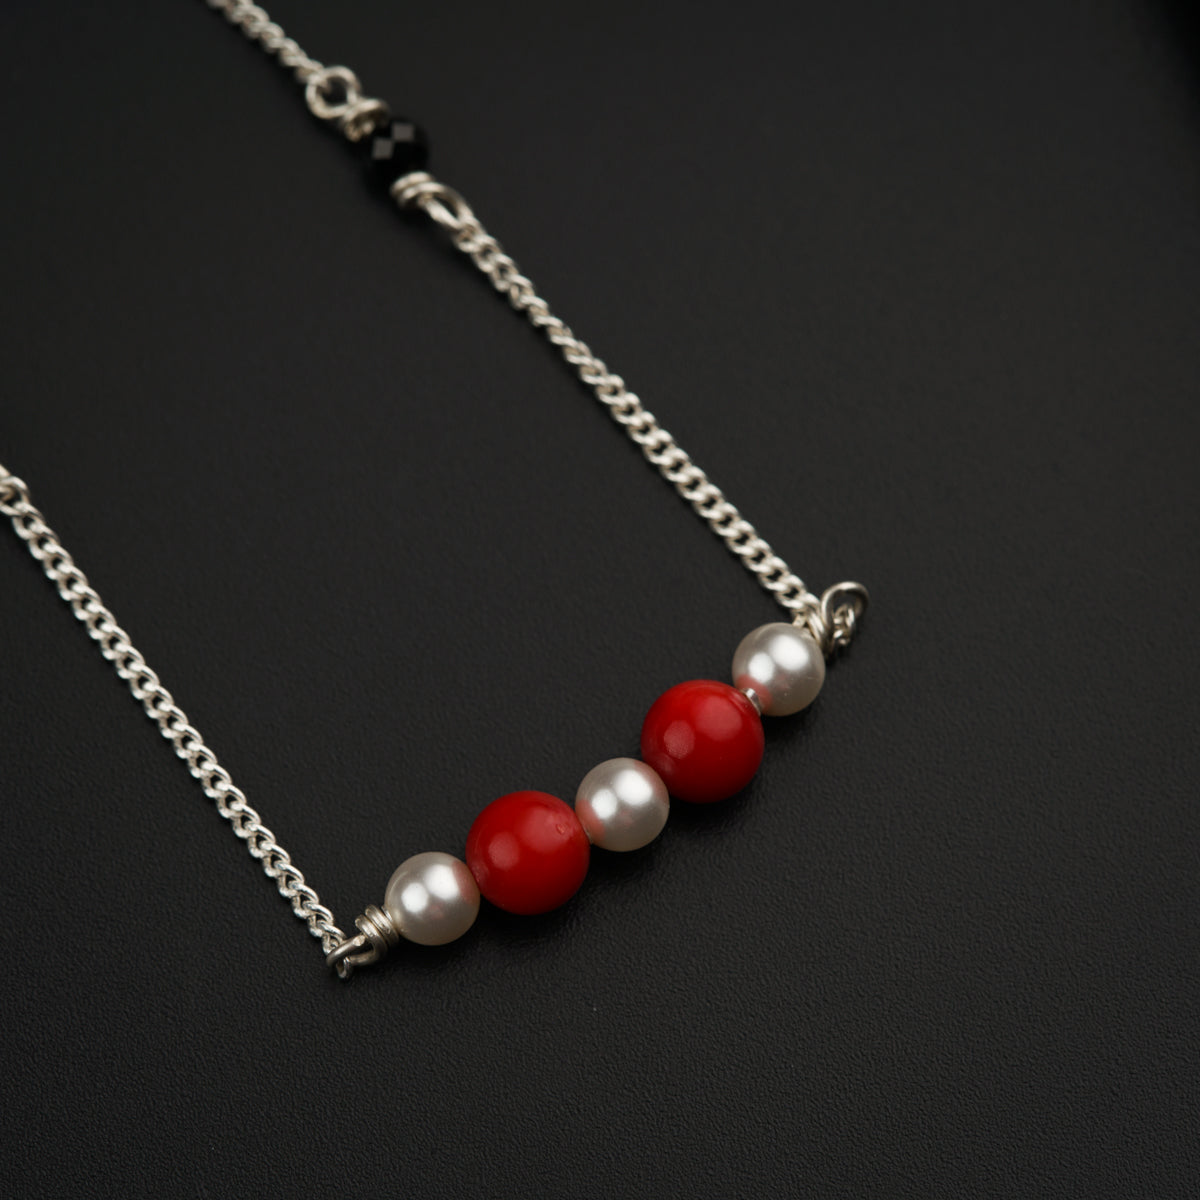 a necklace with three pearls and a red bead